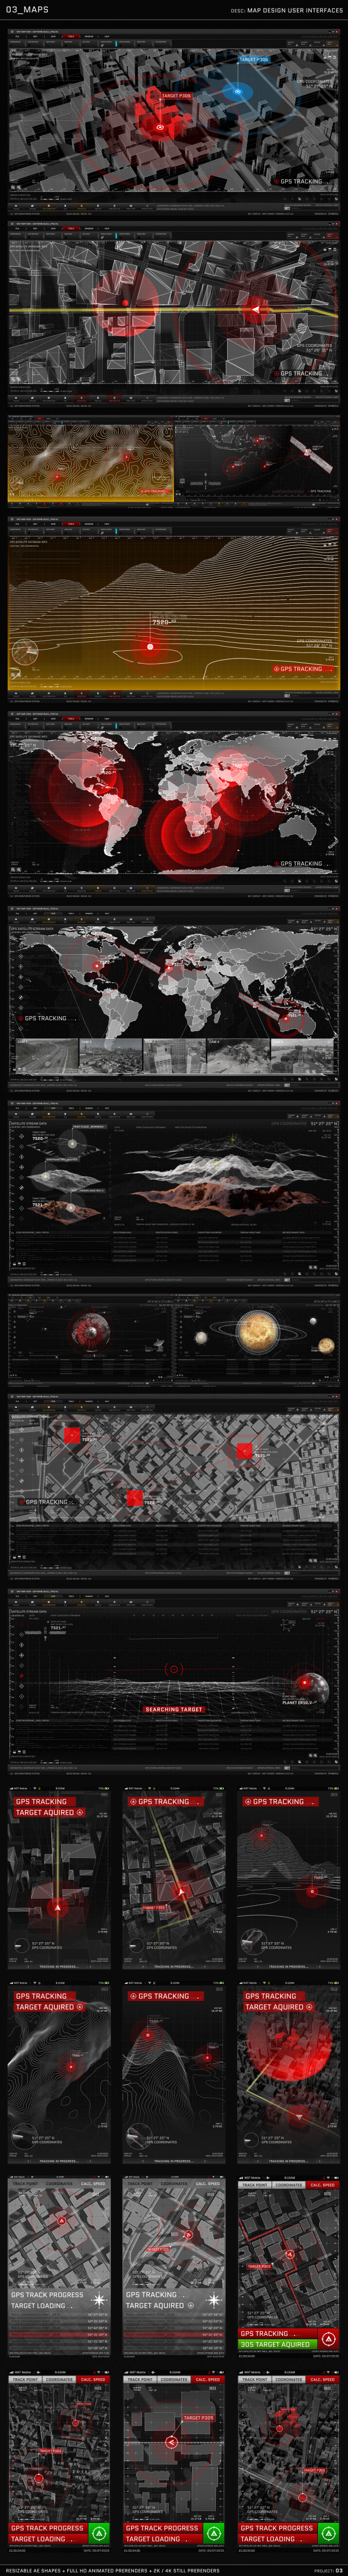 HUD - UI Graphics for FILM, TV and GAMES - 5